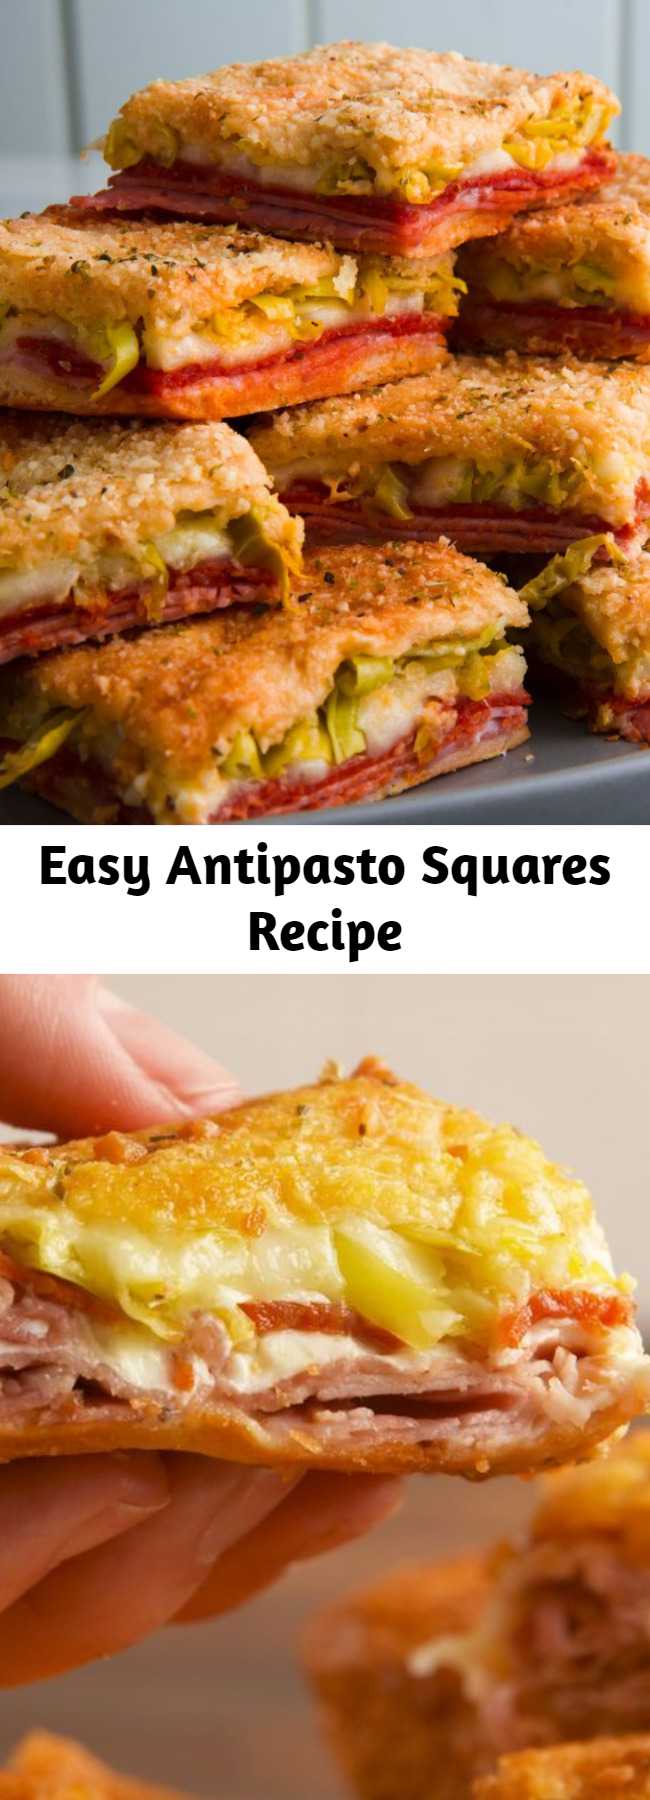 Easy Antipasto Squares Recipe - Turns out an antipasto salad like this gets even better when you layer it between crescent sheets and we aren't mad about that at all. #easy #recipe #antipasto #pizza #squares #bites #superbowlrecipe #superbowl #gameday #appetizer #snack #cheese #crescentroll #easyrecipes #mozzarella #provolone #pepperoni #ham #peppers